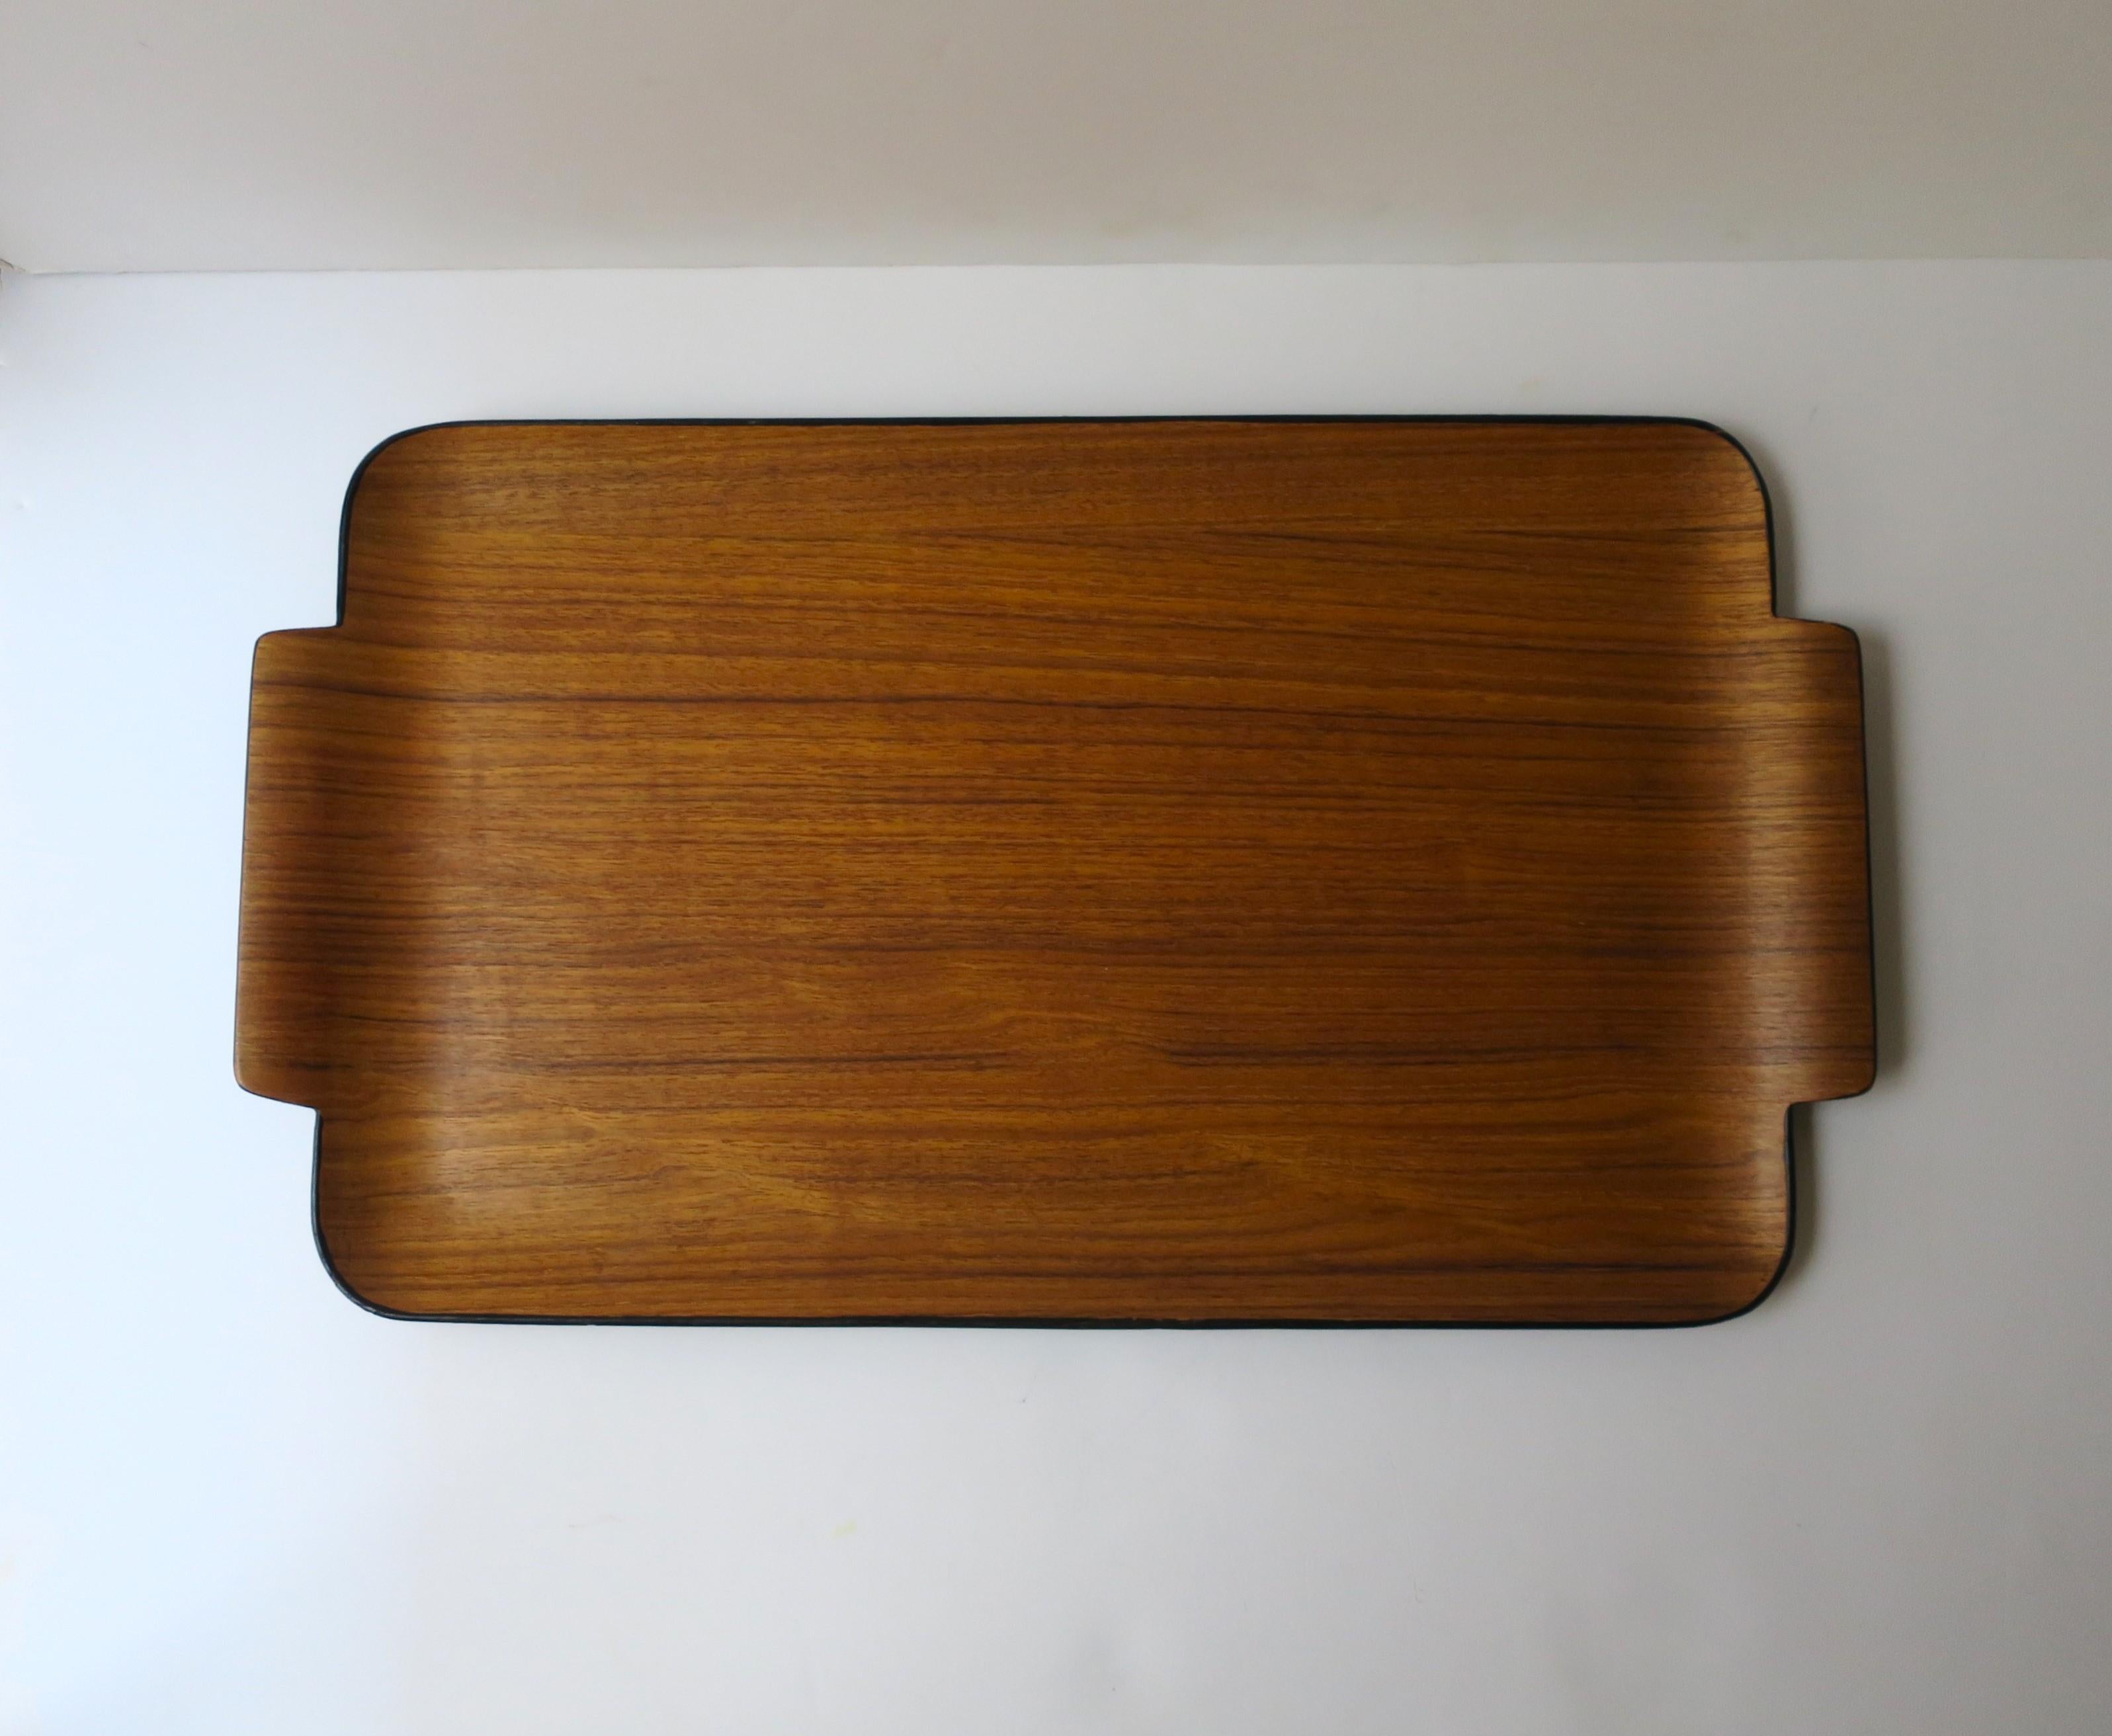 A beautiful Japanese teak serving tray, Midcentury Modern design period, circa mid-20th century, 1960s, Japan. Tray is a warm brown teak, strategically arched design around, sleek 'handles', finish with a matte black edge and underside. Beautiful